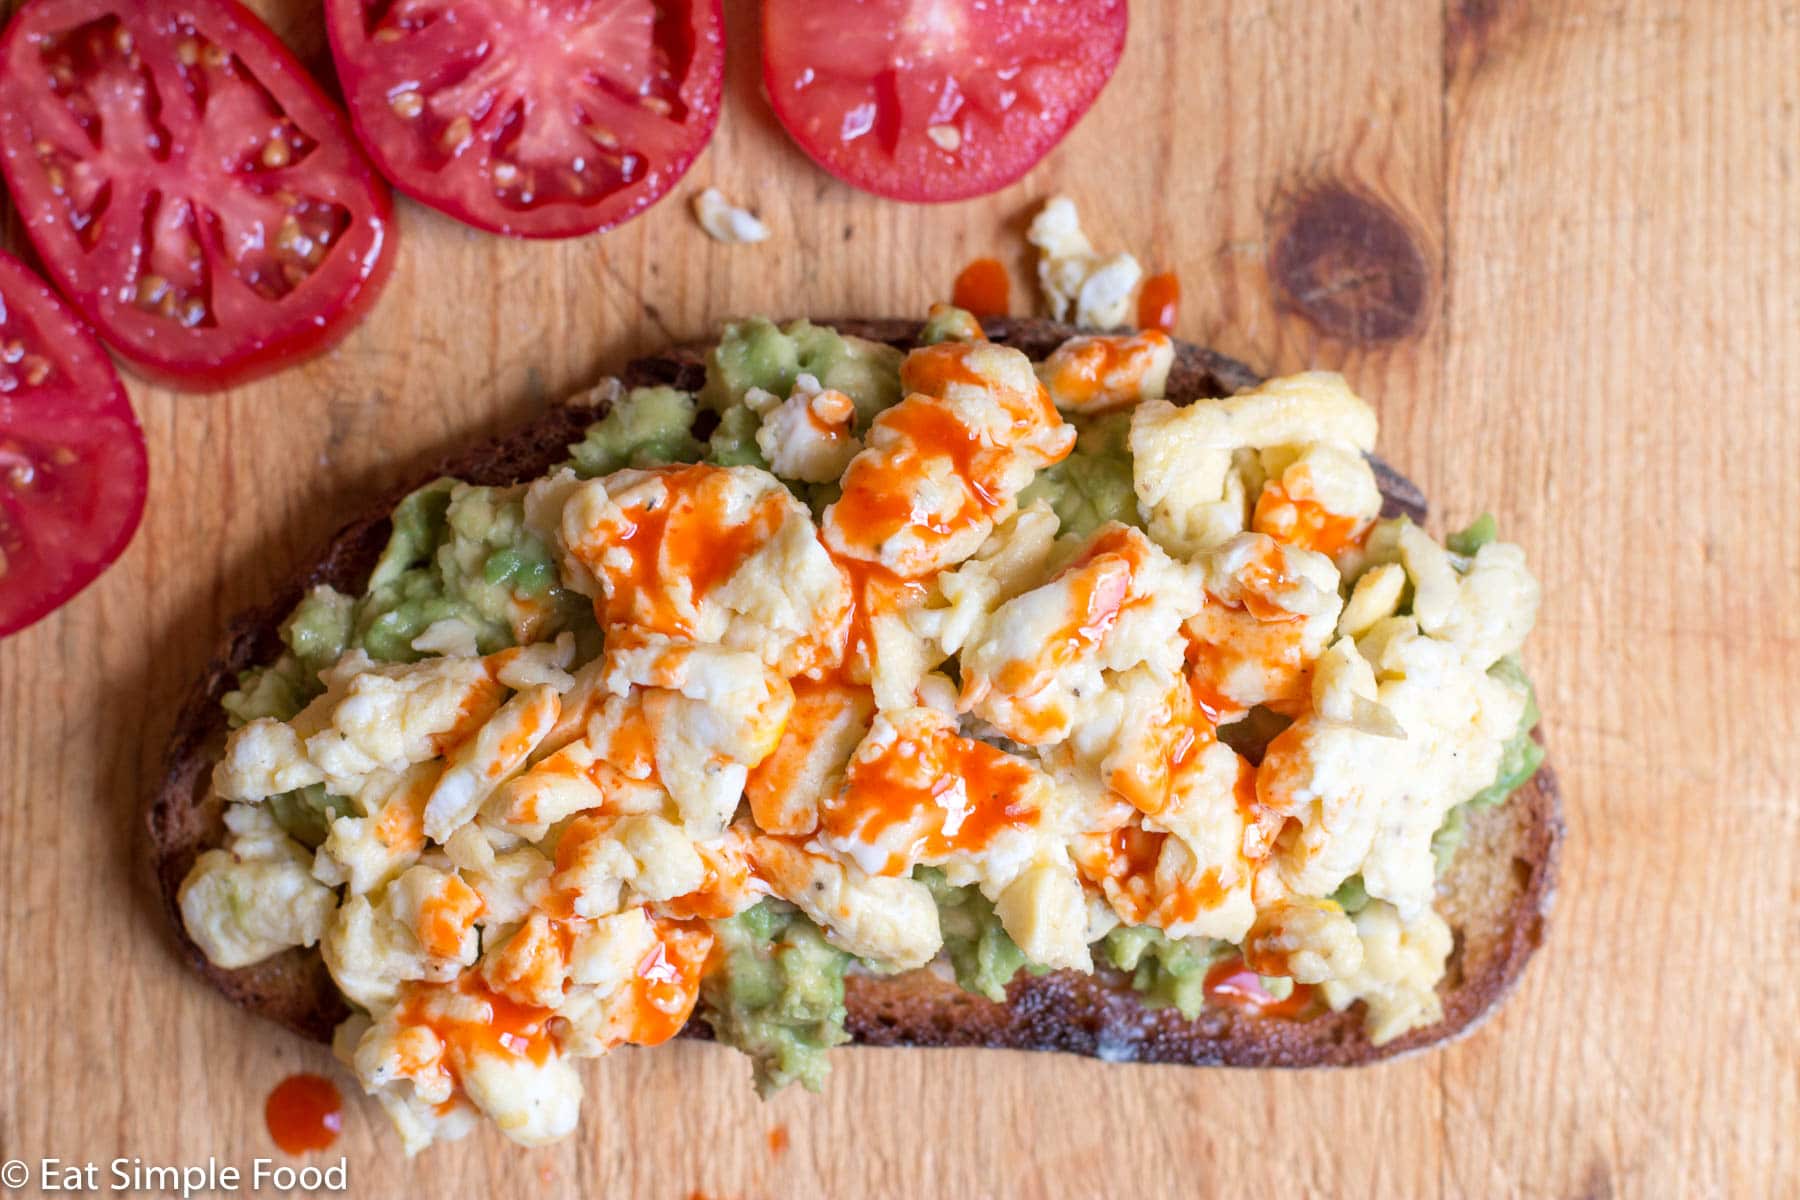 Top View Of Toast with Mashed Avocado, Scrambled Egg, and Hot Sauce On a Cutting Board with tomato Slices